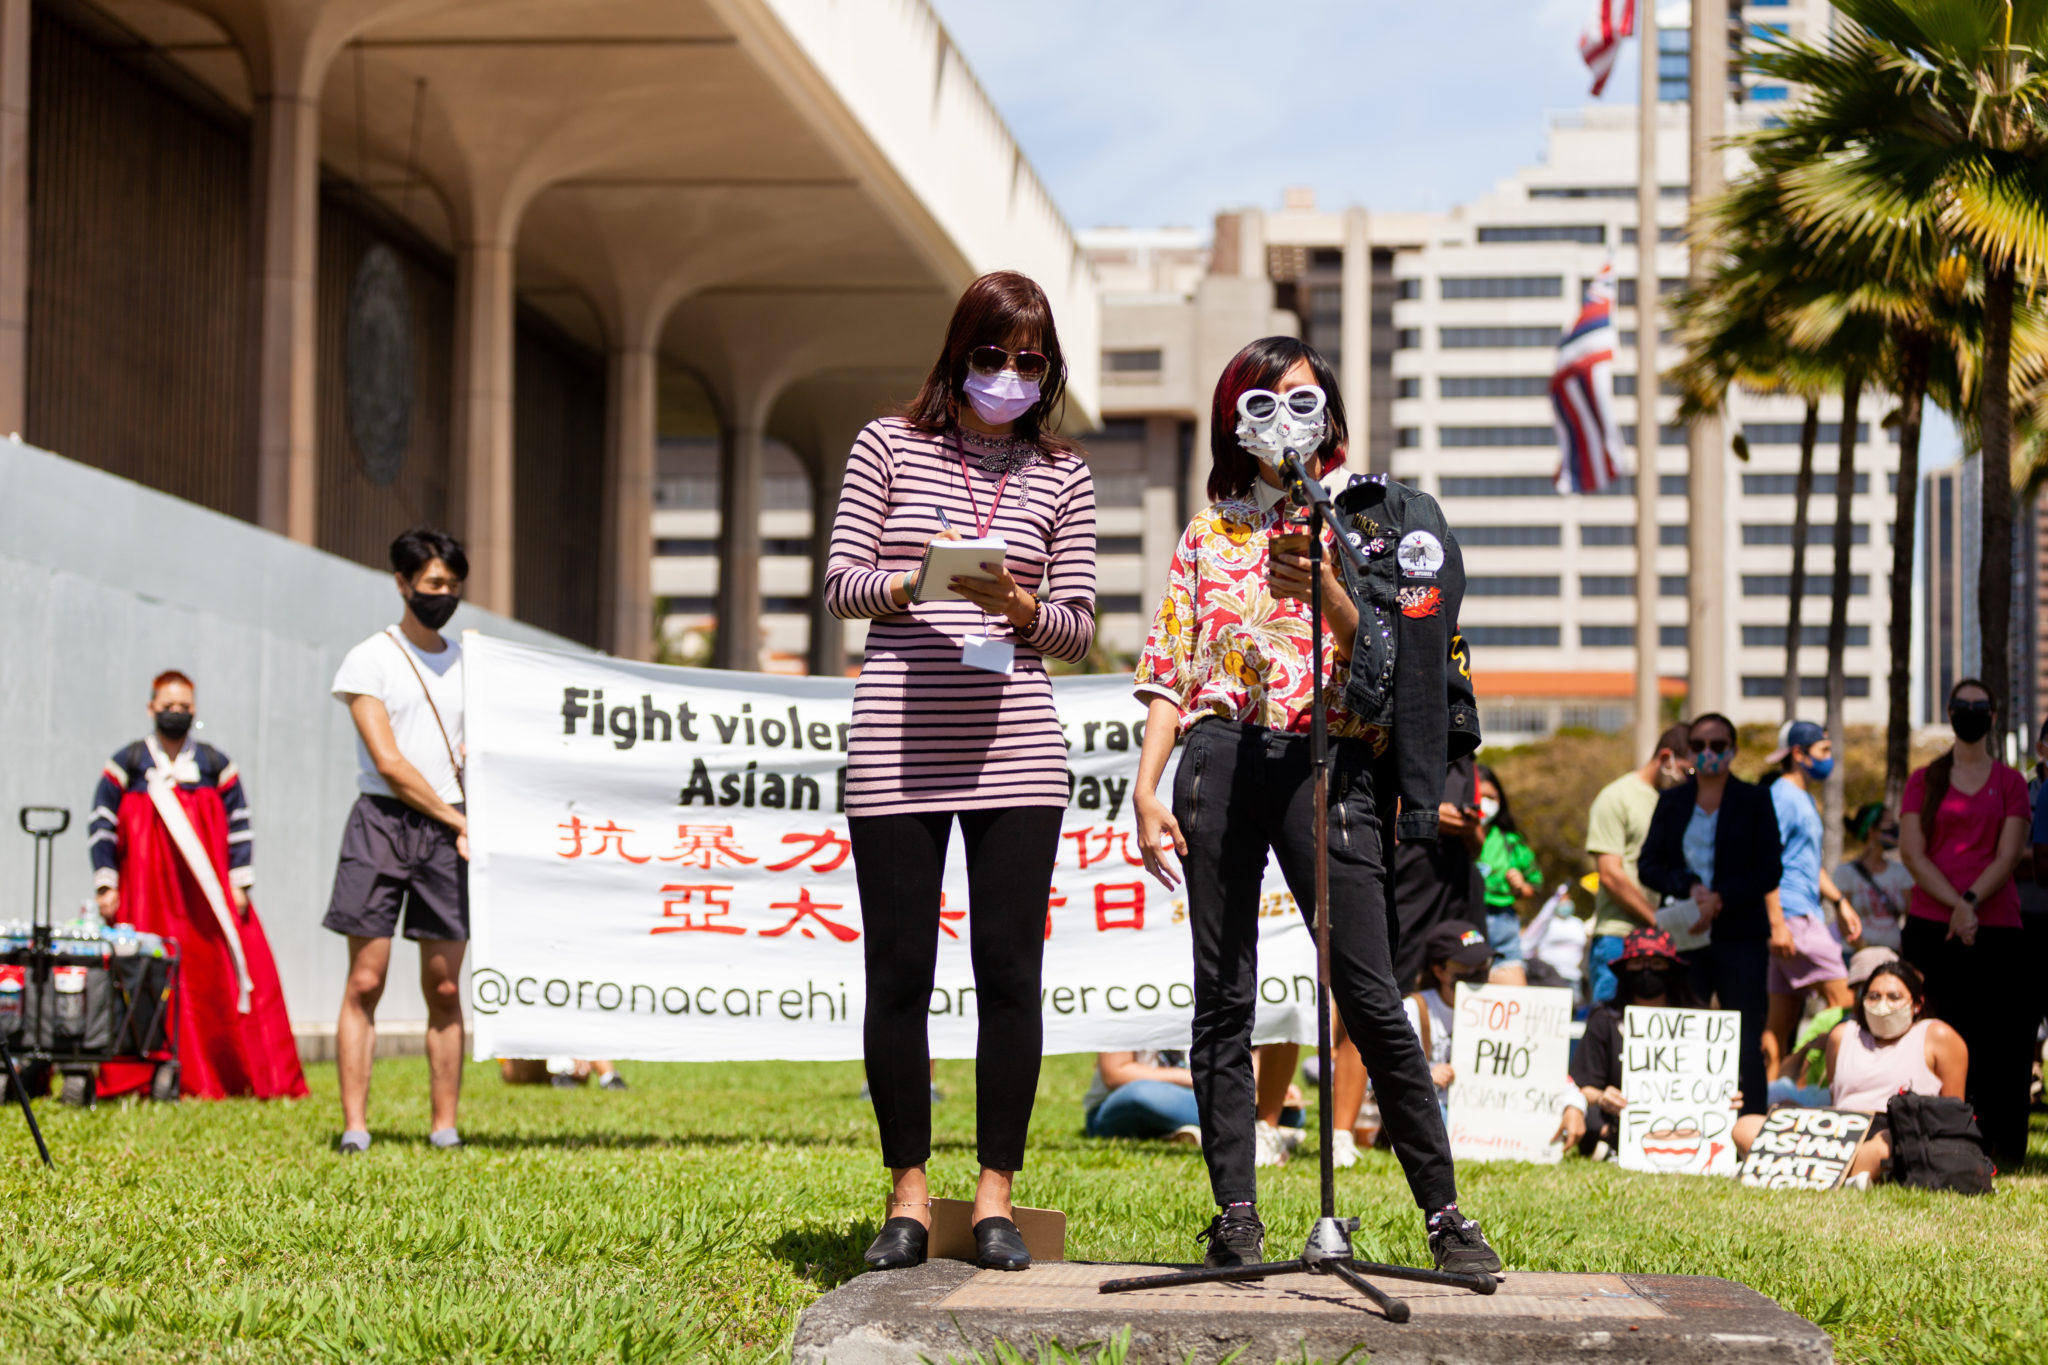 Two demonstrators at the Stop Asian Hate rally in Honolulu